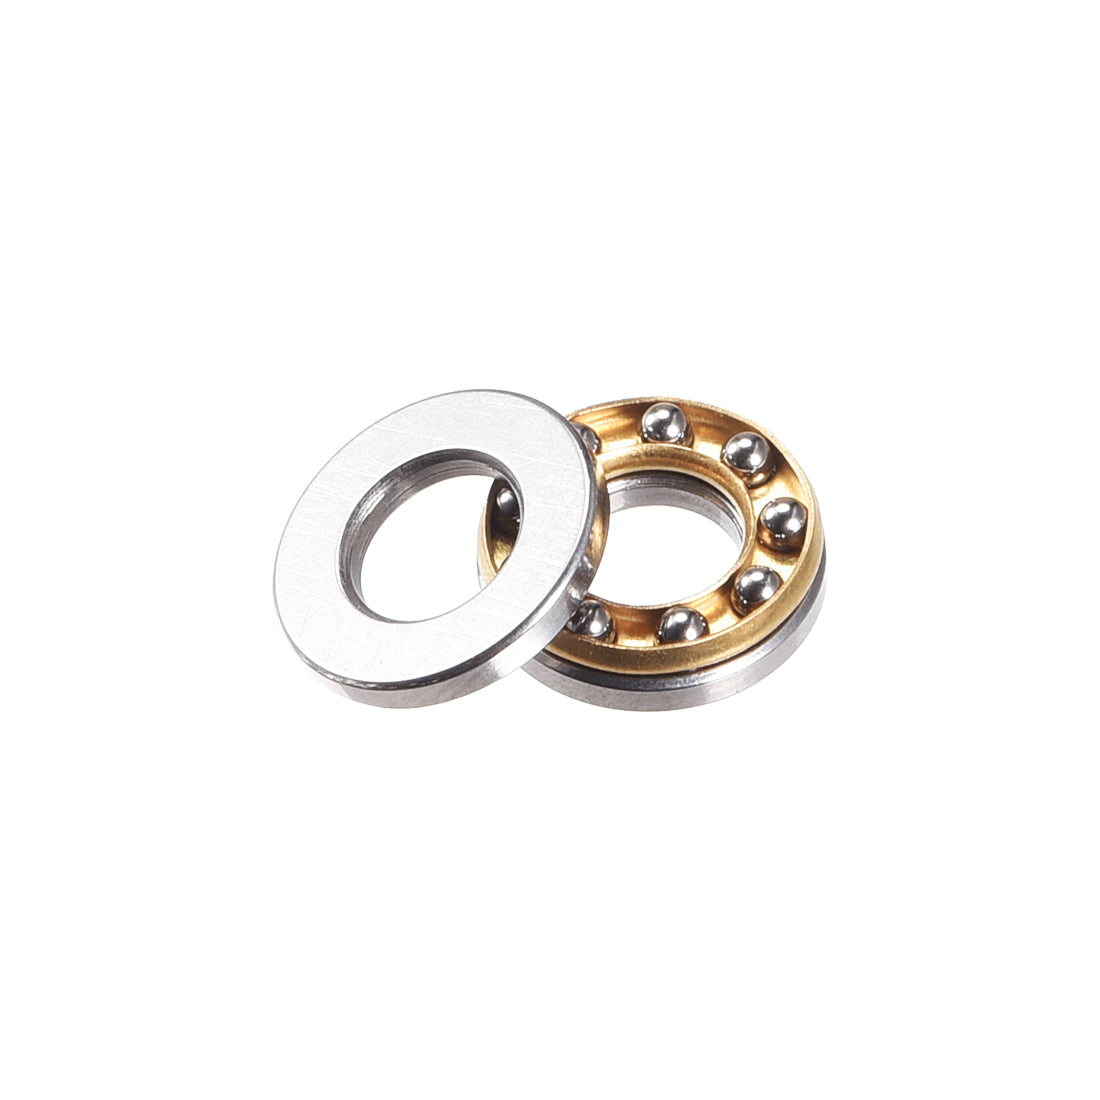 uxcell Uxcell F5-10M Miniature Thrust Ball Bearings 5x10x4mm Chrome Steel with Washers 2 Pcs